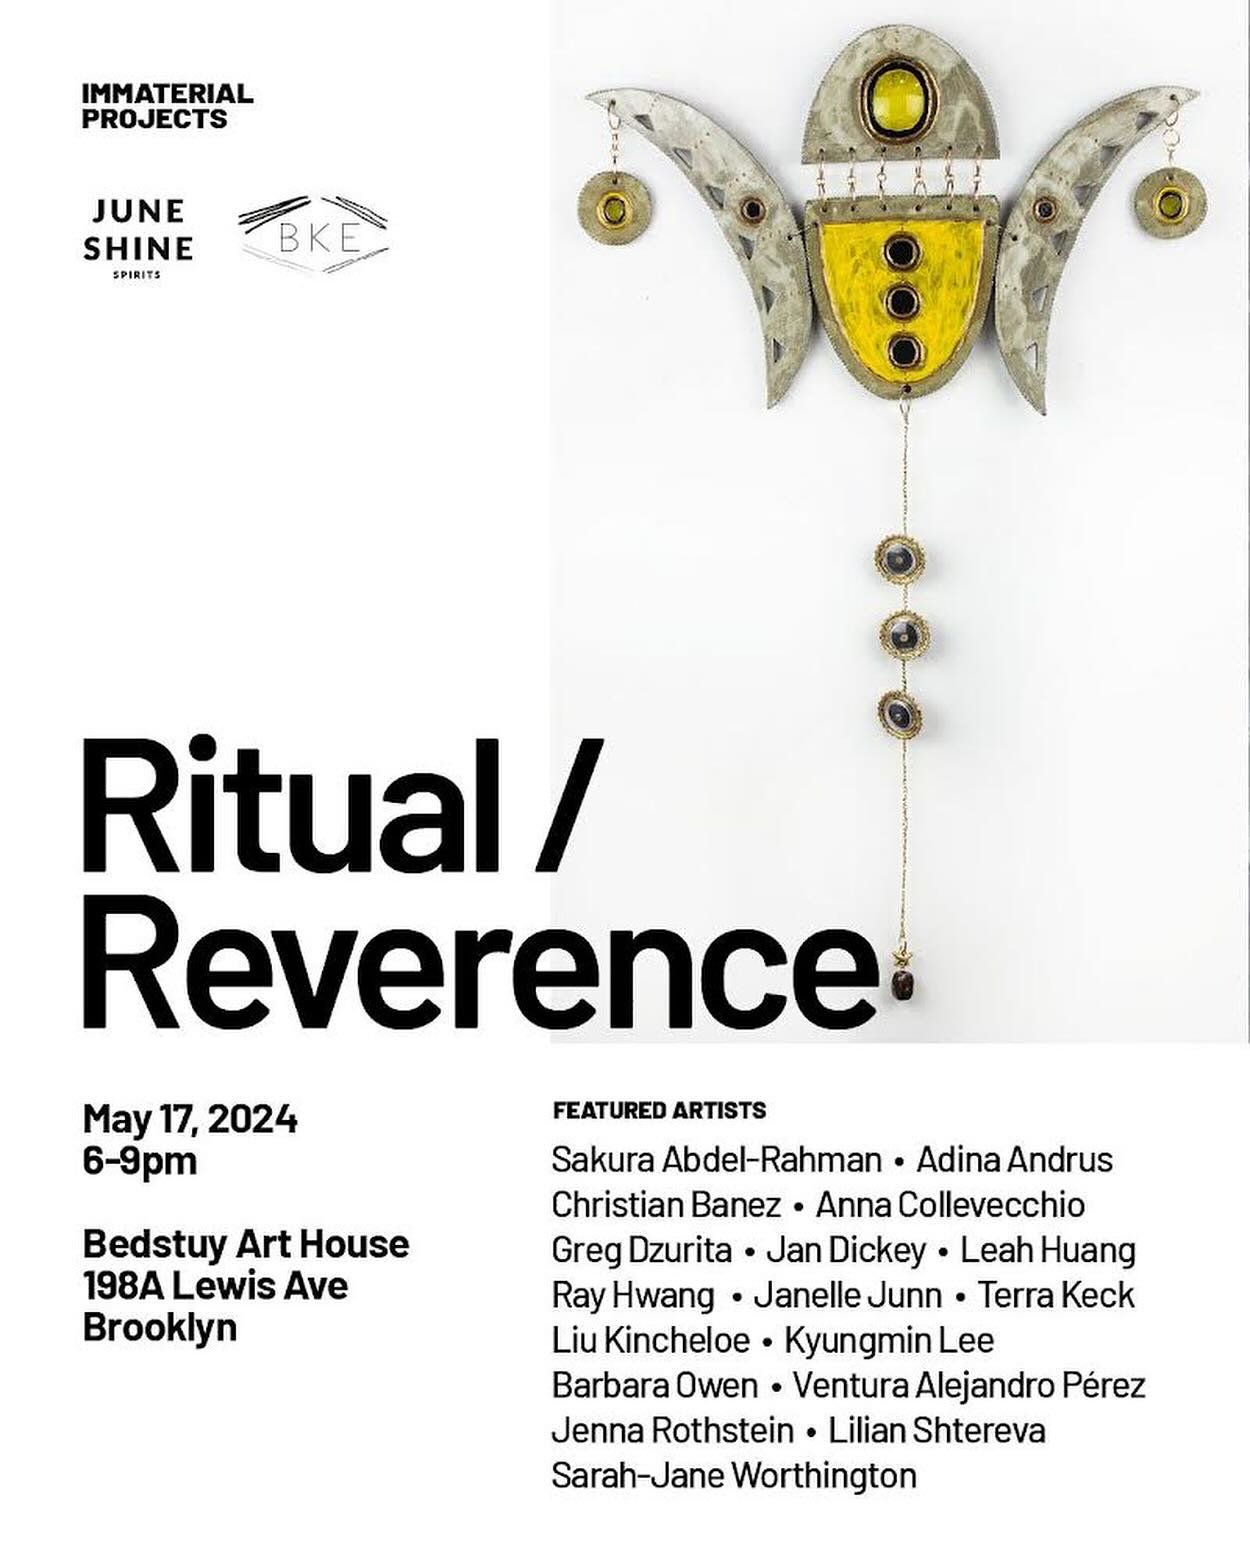 Ritual/Reverence art show is opening next Friday, May 17th. I&rsquo;m excited to venture out to Brooklyn and meet a new artist community. Bringing my best self and one of the largest artworks I&rsquo;ve done so far. 

Thank you @immaterial.projects f